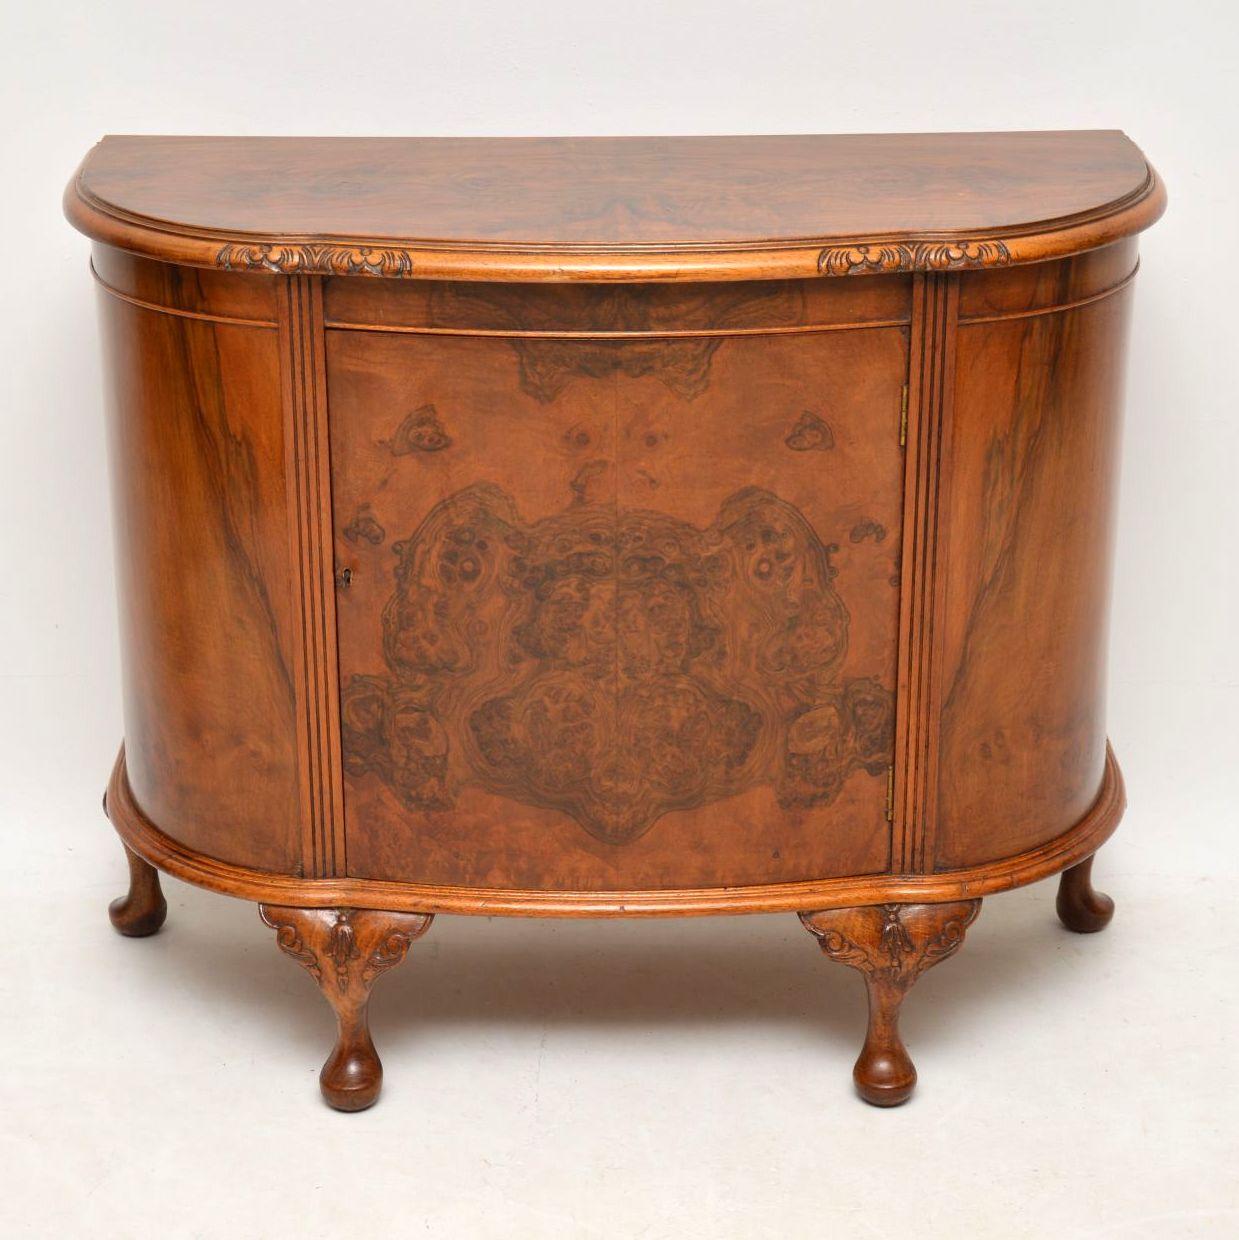 This antique walnut side cabinet has a serpentine shaped front with a burr walnut top and front. It’s in excellent condition and has just been French polished. The figuring on the veneers shows some beautiful patterns. It also has a carved top edge,